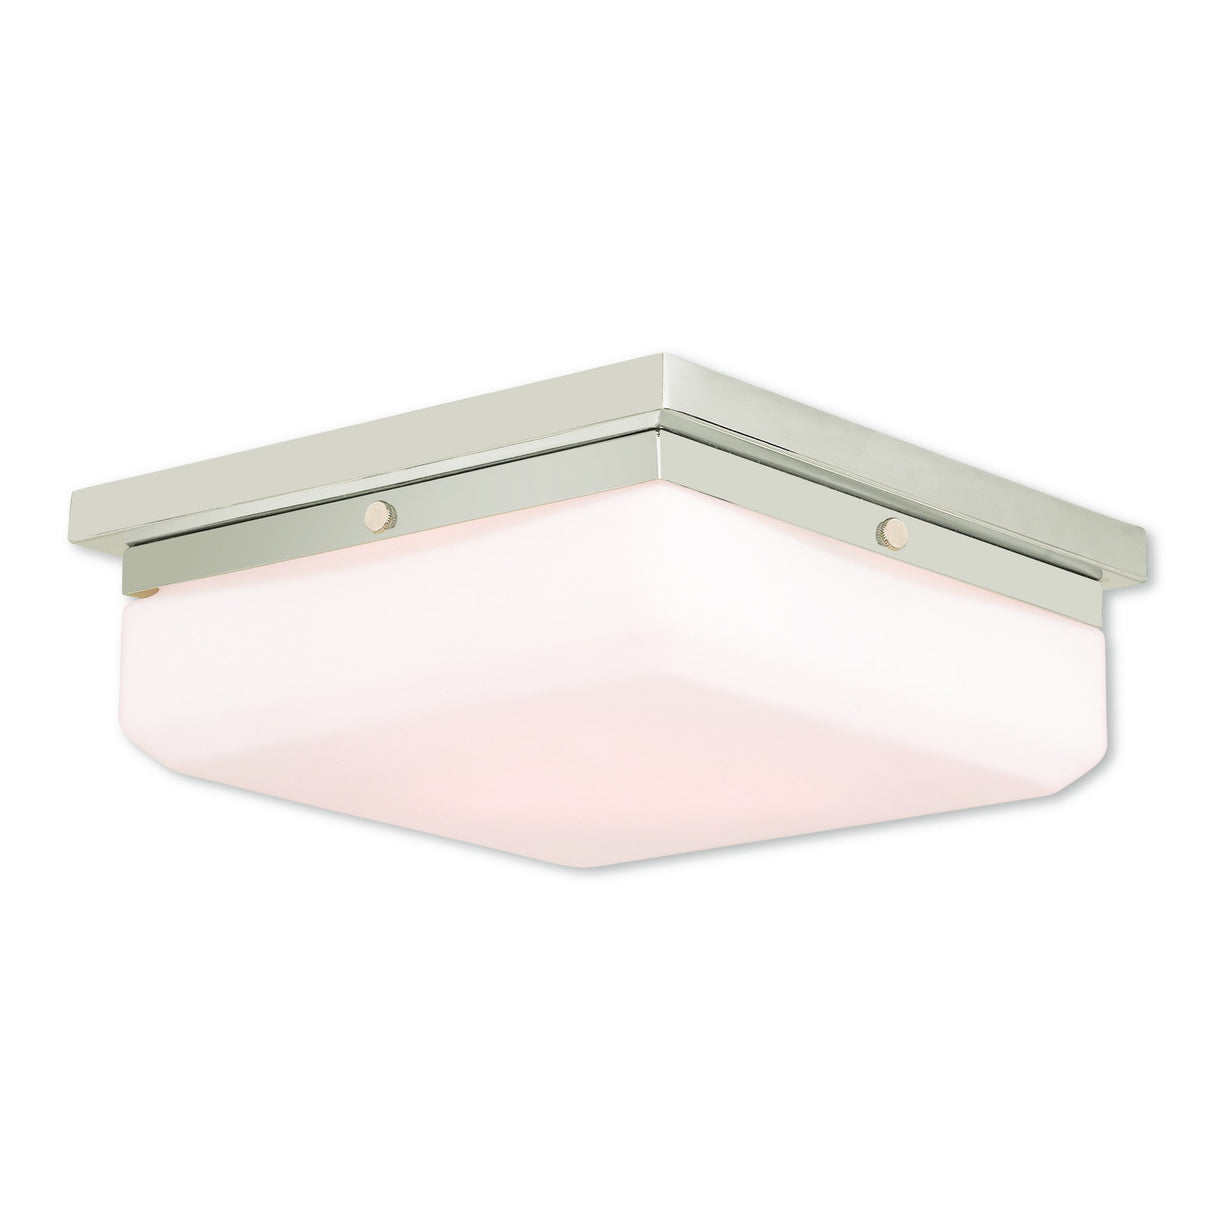 Livex Lighting 65537-35 Transitional Three Light Wall Sconce/Ceiling Mount from Allure Collection in Polished Nickel Finish, 11.00 inches, 3.88x11.00x11.00